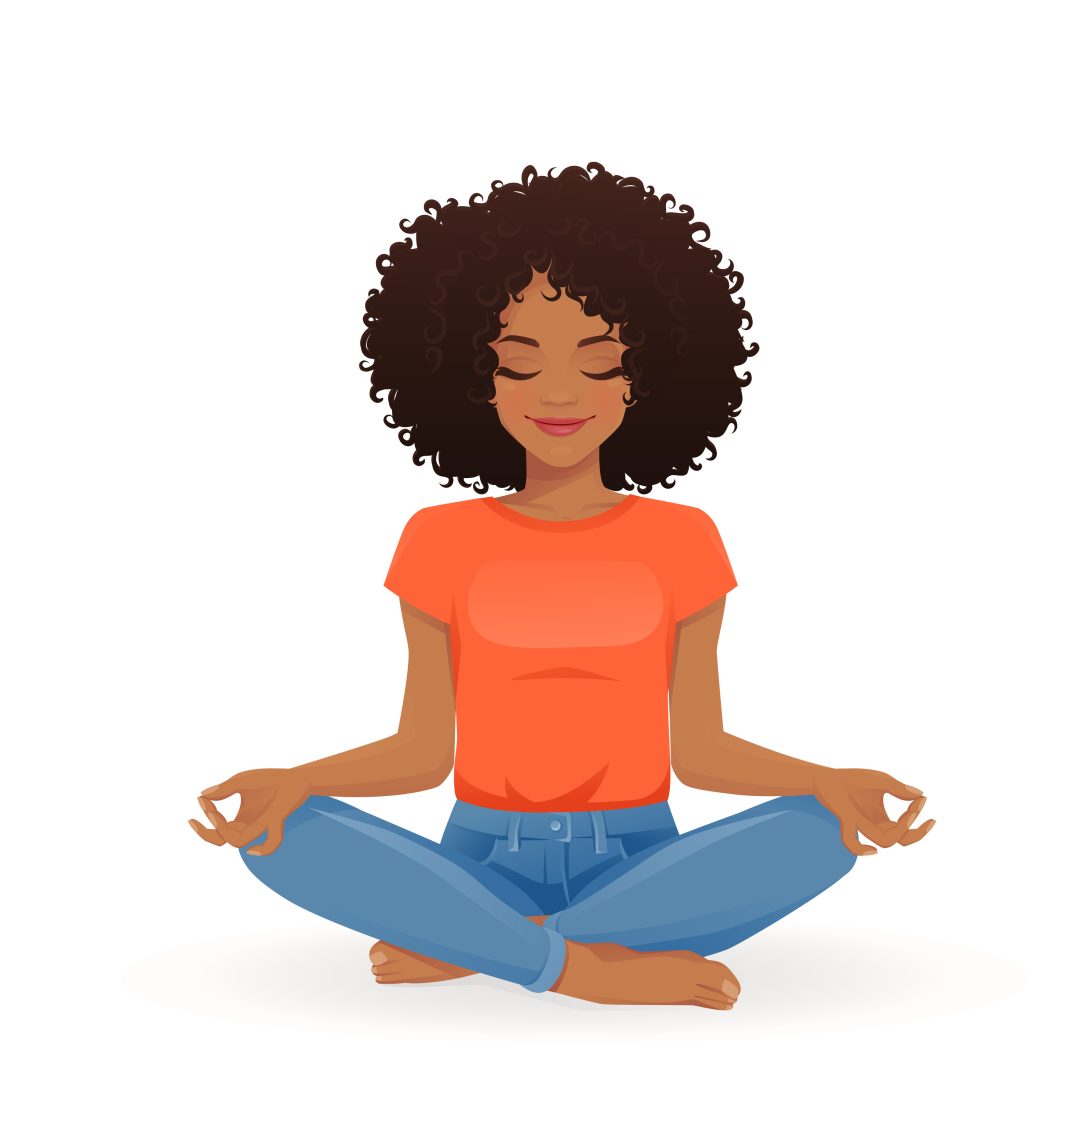 A illustration of a young Black woman practicing yoga sitting in lotus pose with crossed legs.